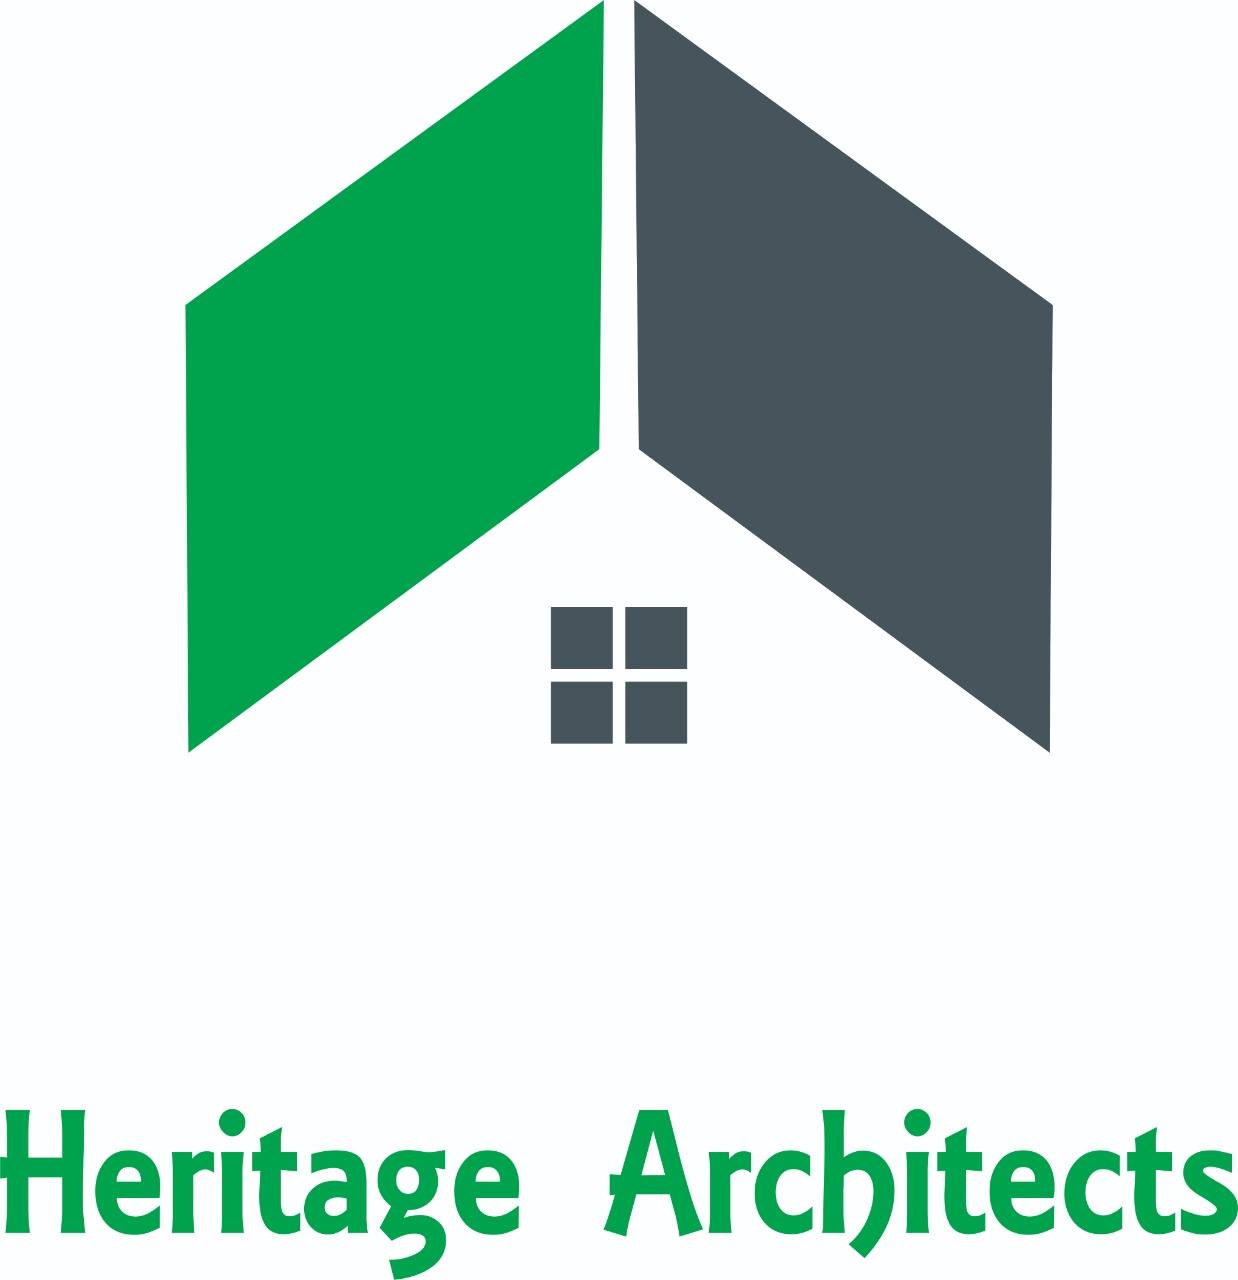 Heritage Architects|Accounting Services|Professional Services